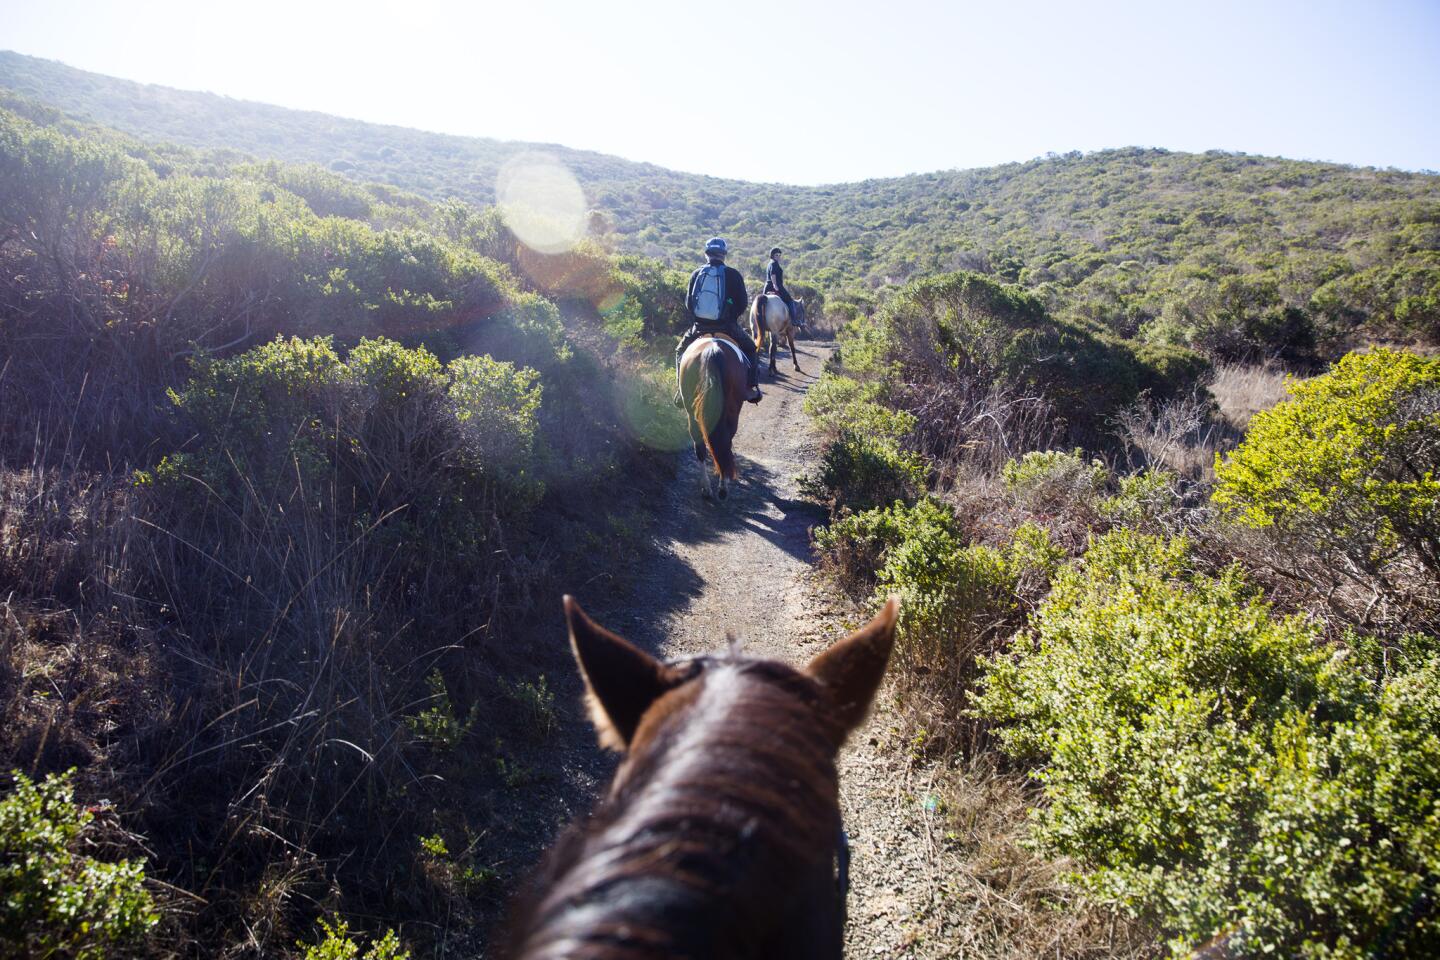 The busiest unit in our national park system is the 80,000-acre non-contiguous realm that flanks San Francisco's Golden Gate Bridge, known as the Golden Gate National Recreation Area. Here, horse riders clip-clop along the Marin Headlands' Old Springs Trail.